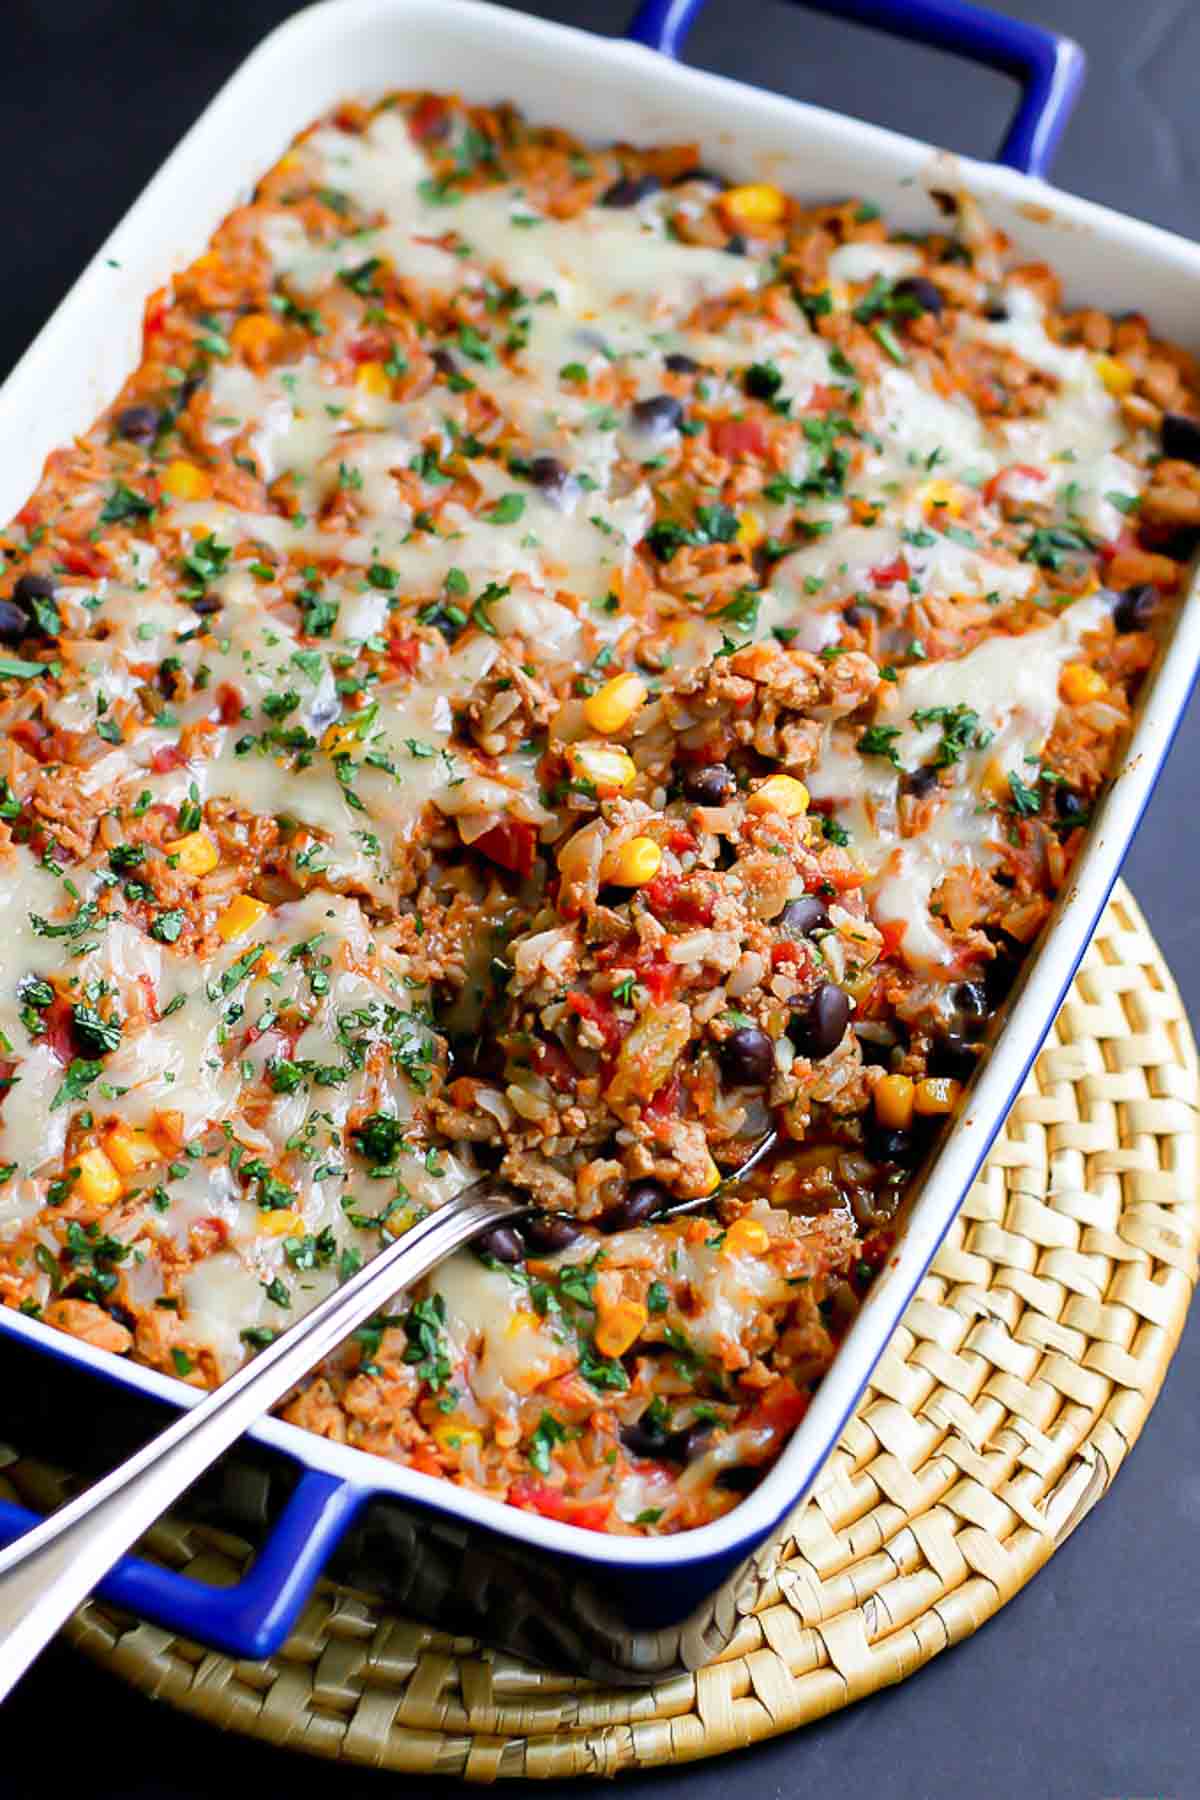 This southwestern turkey casserole recipe is a fantastic mix of spices, rice, vegetables and lean protein. It all comes together in about 30 minutes for a healthy dinner. 